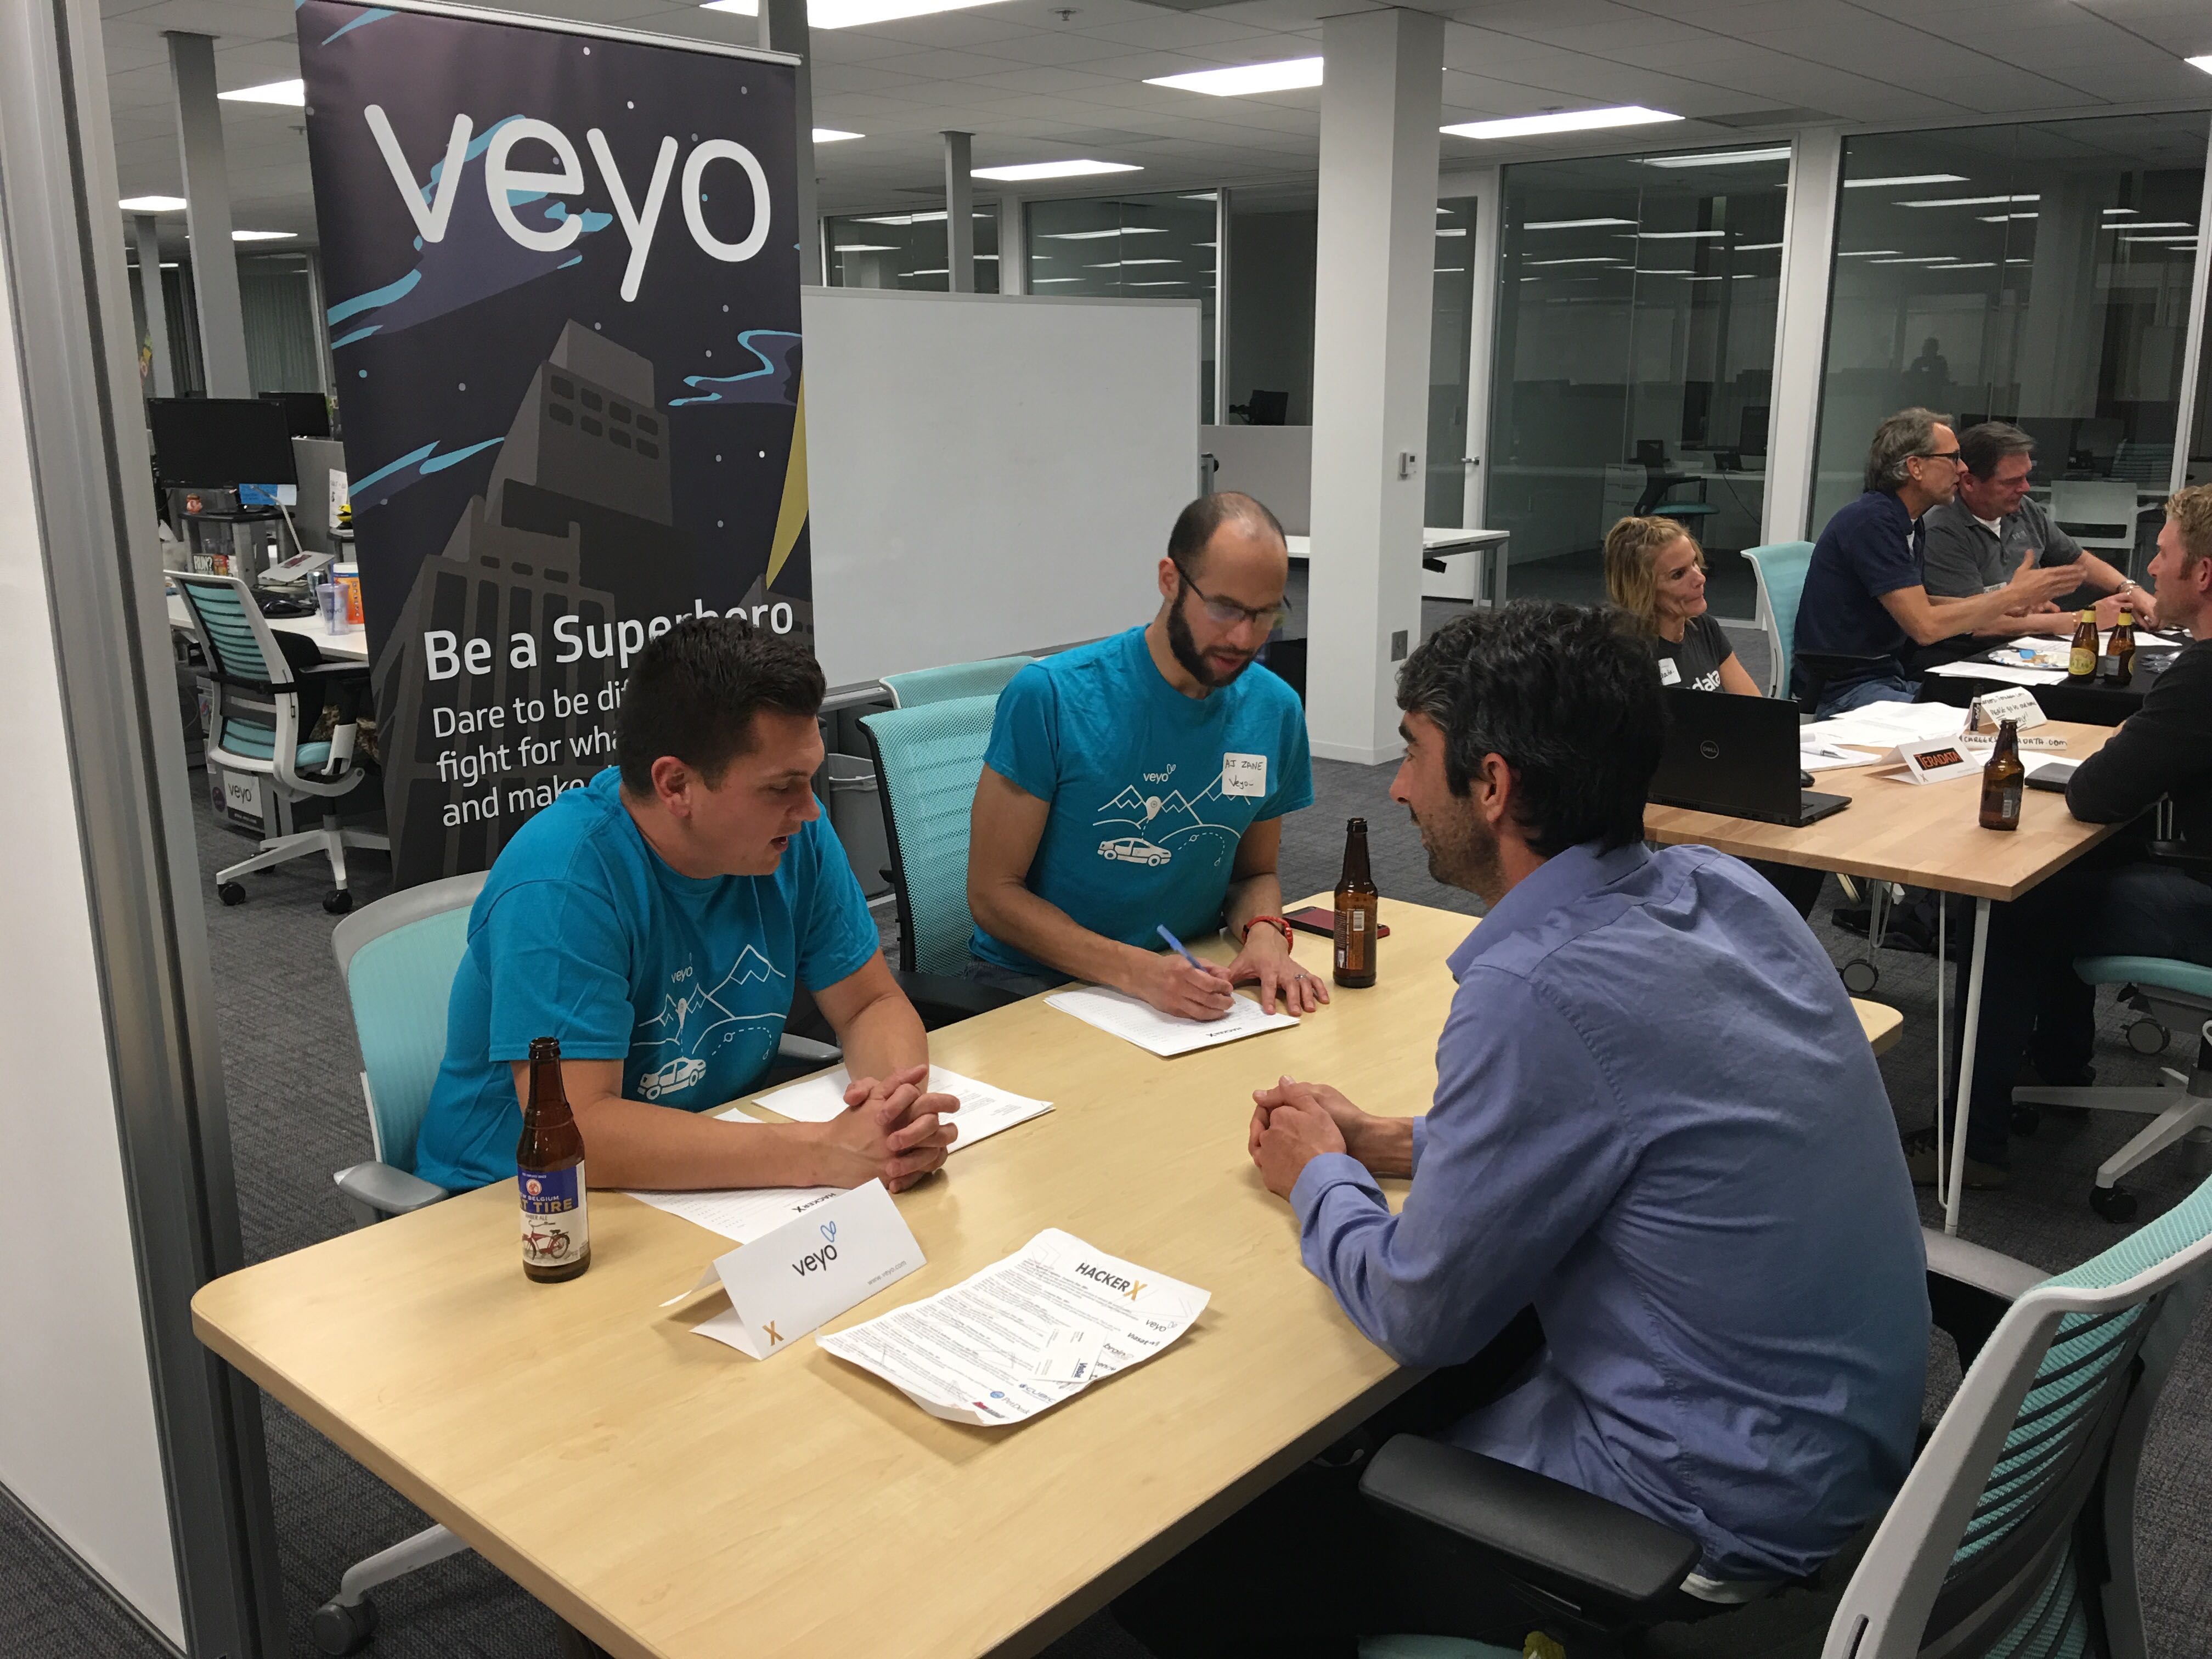 Veyo Hosted a HackerX Event in our San Diego Office